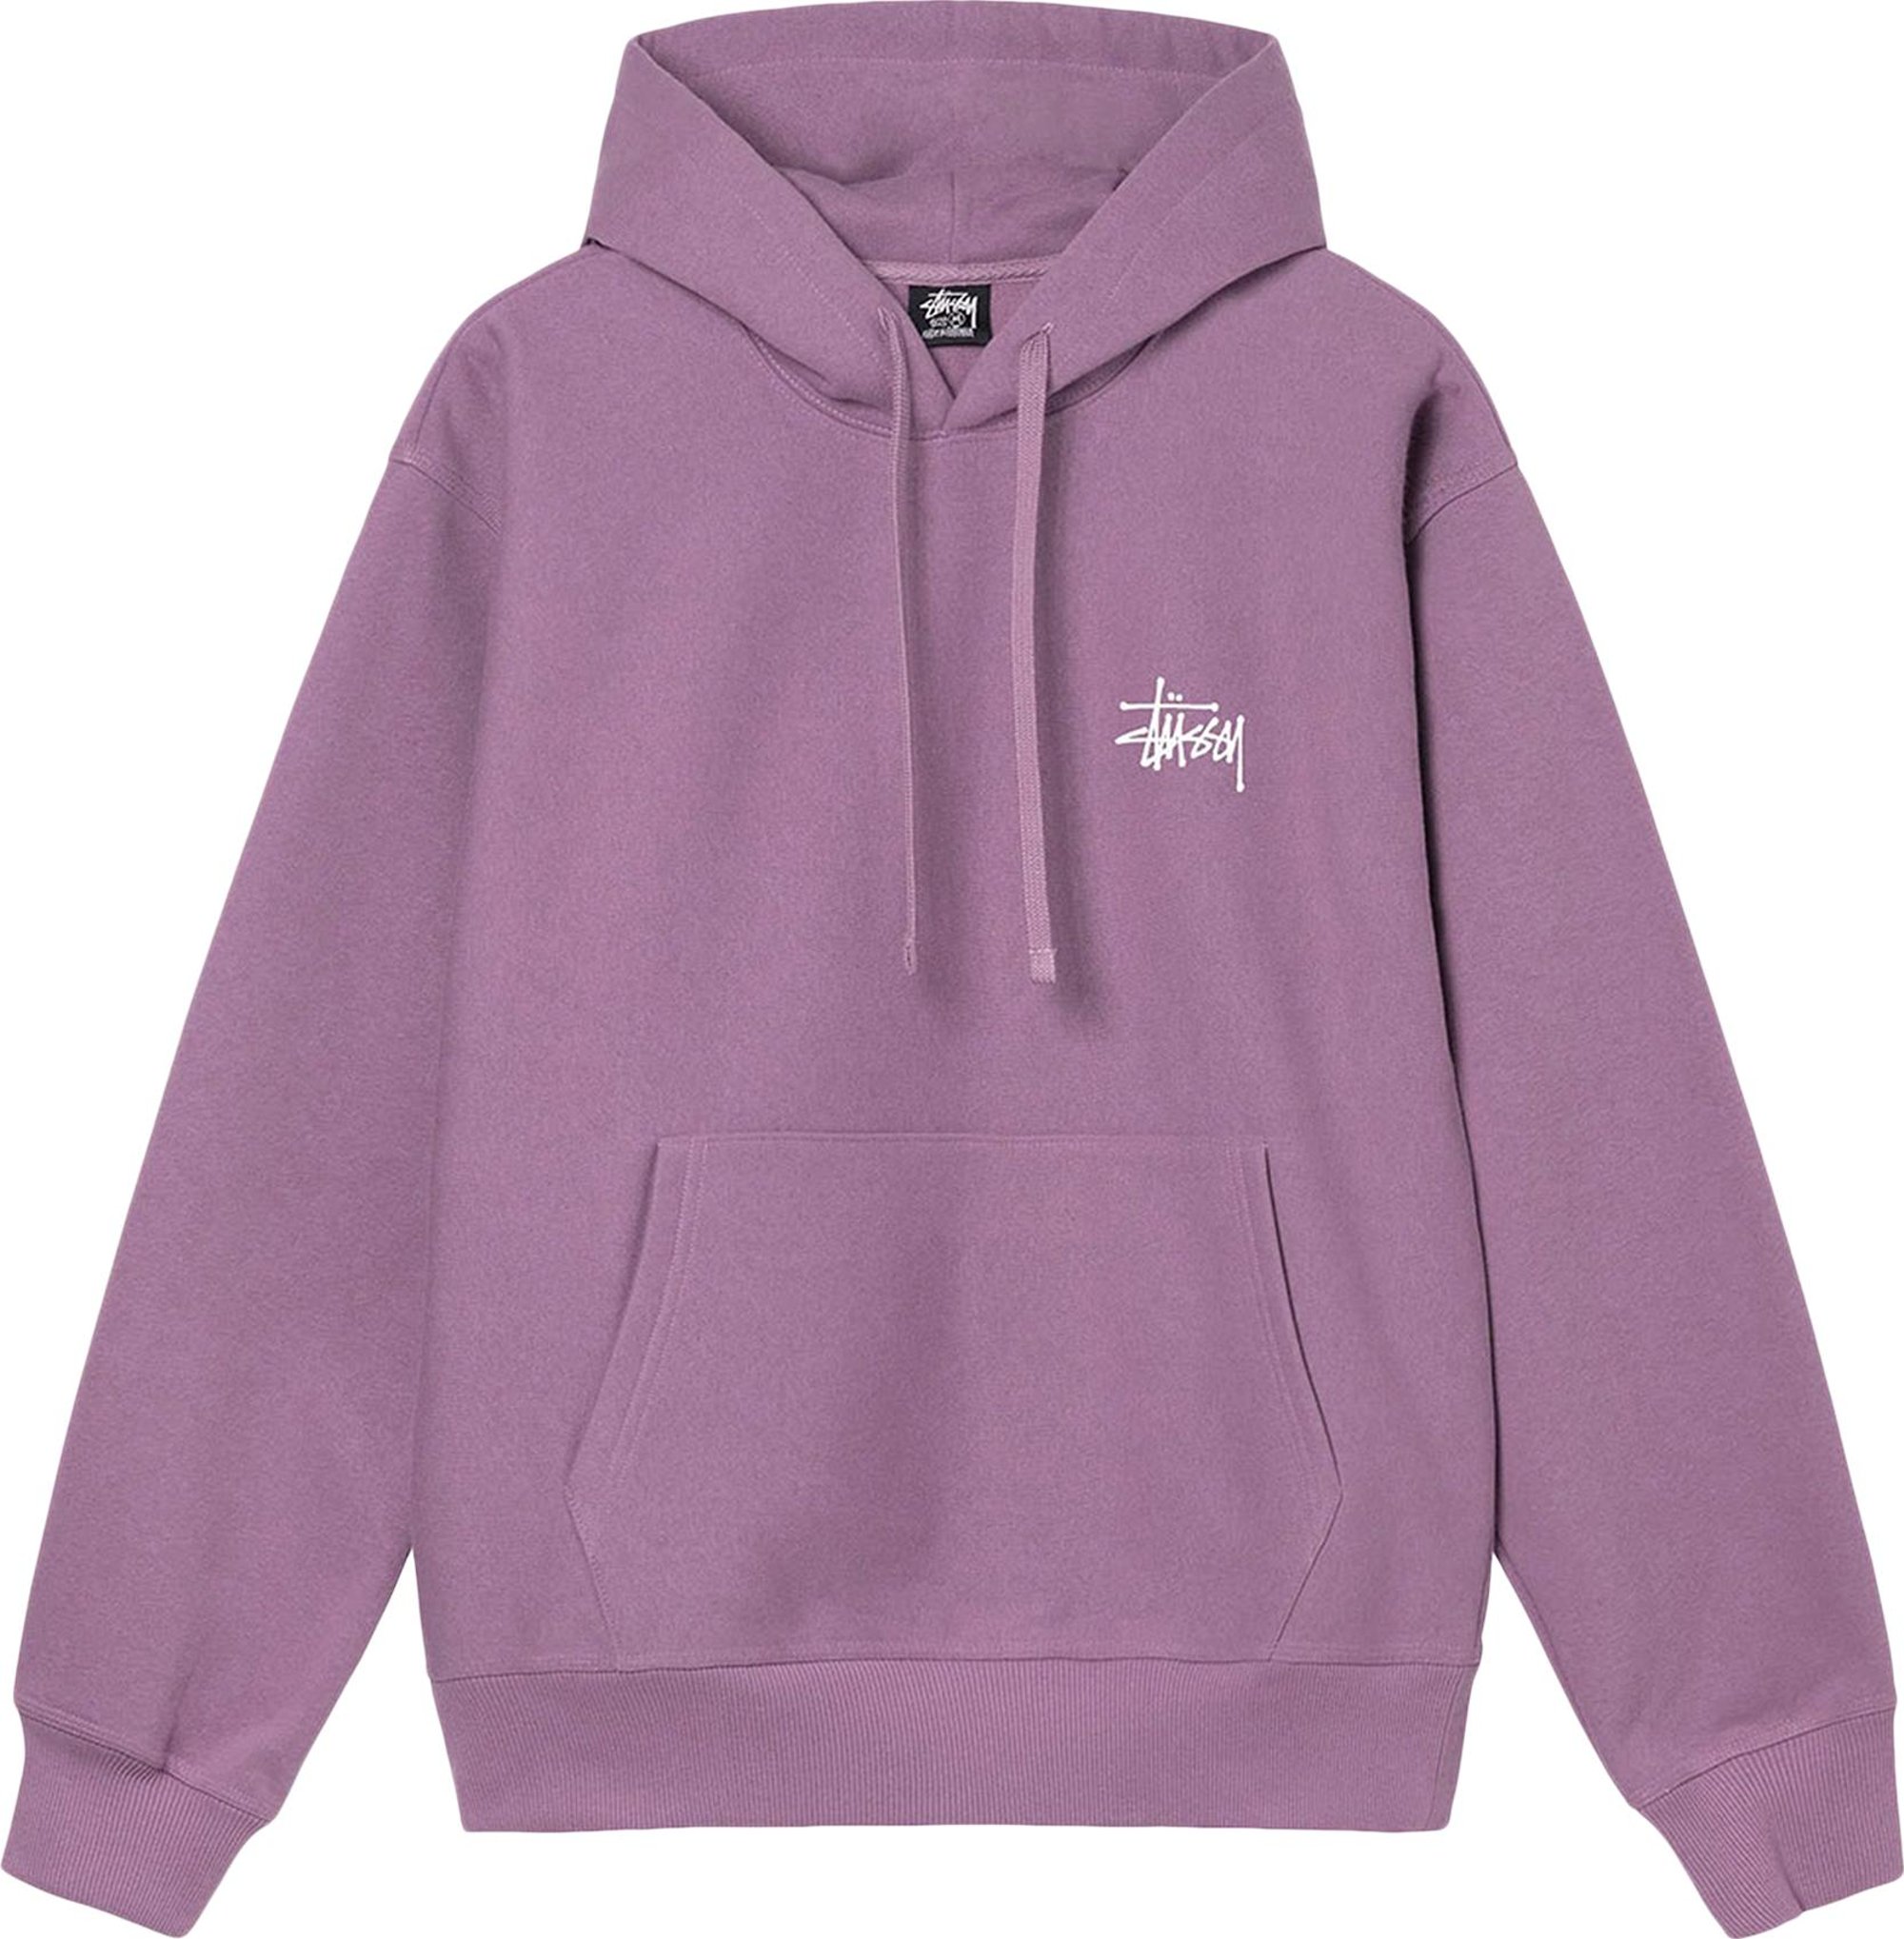 Buy Stussy Basic Hood 'Orchid' - 1924762 ORCH | GOAT